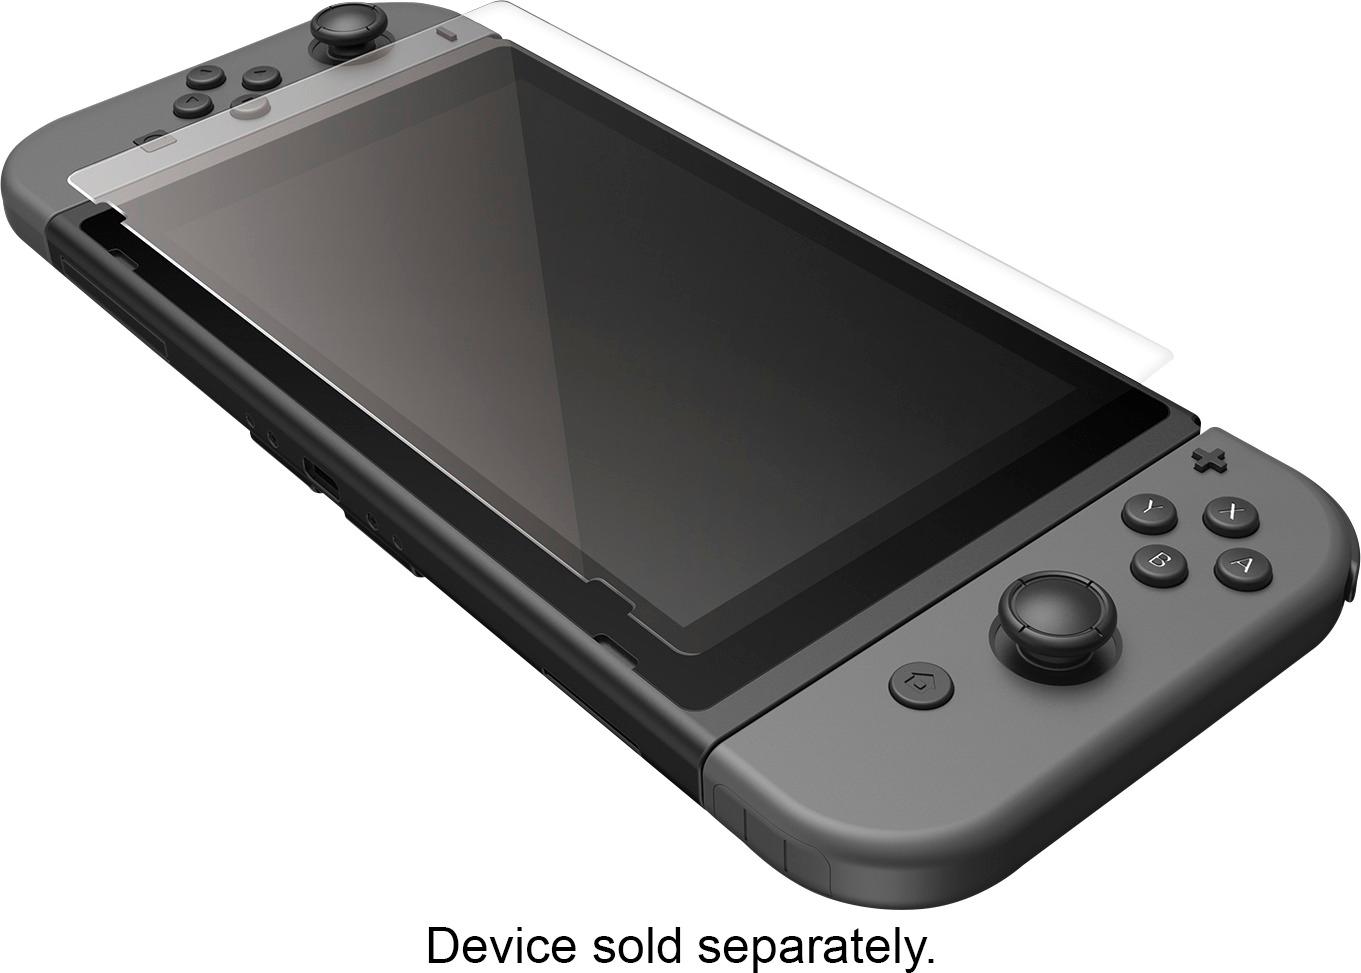 nintendo switch without screen protector